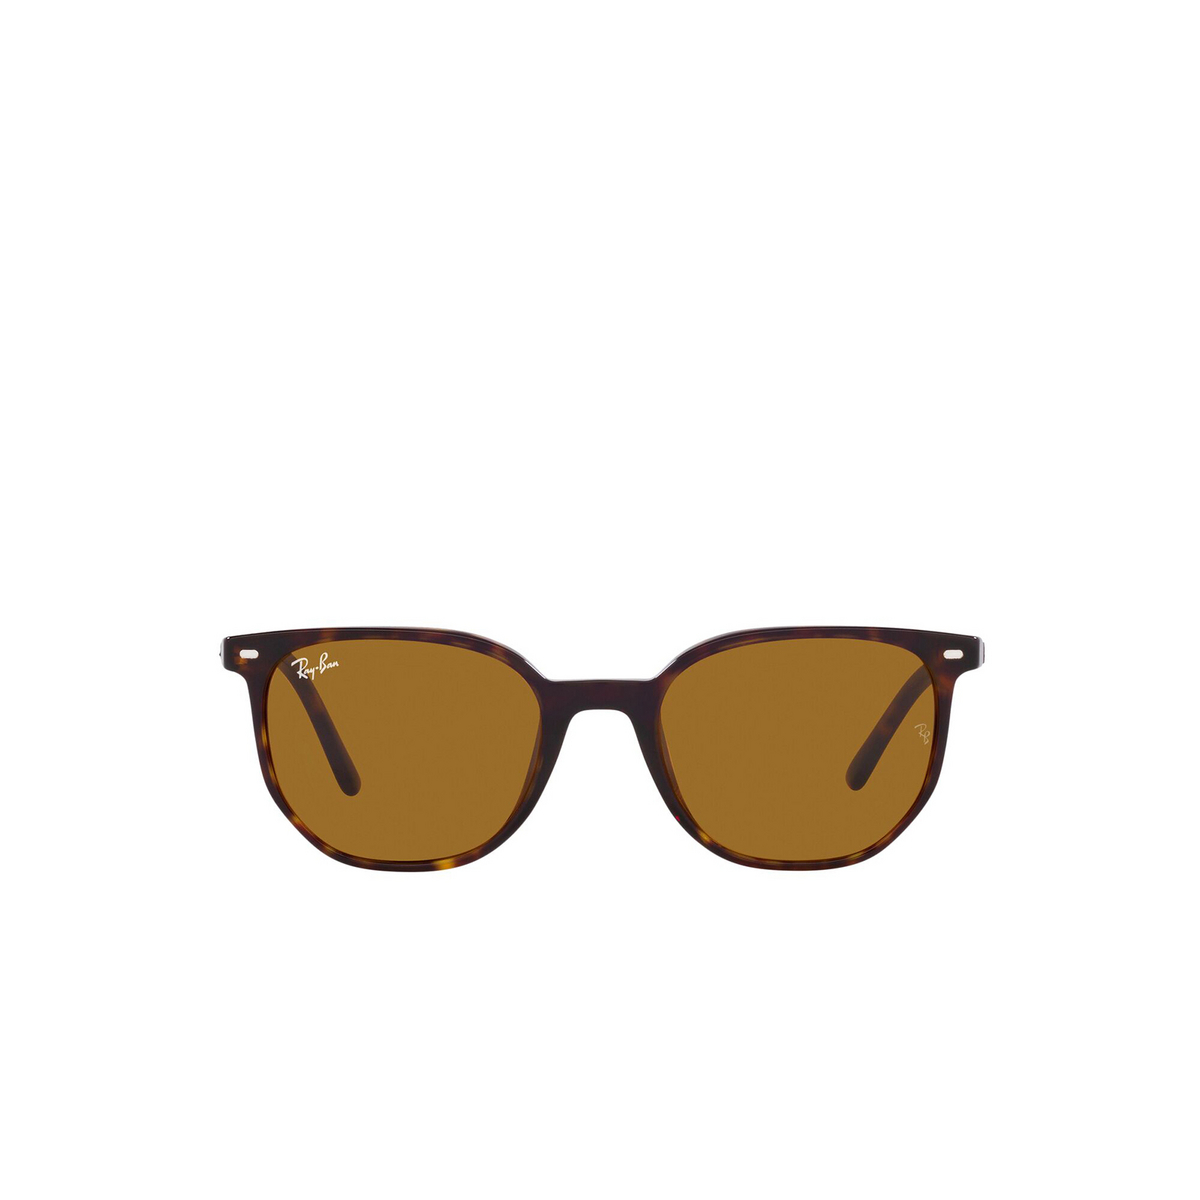 Ray-Ban® Square Sunglasses: Elliot RB2197 color Havana 902/33 - front view.